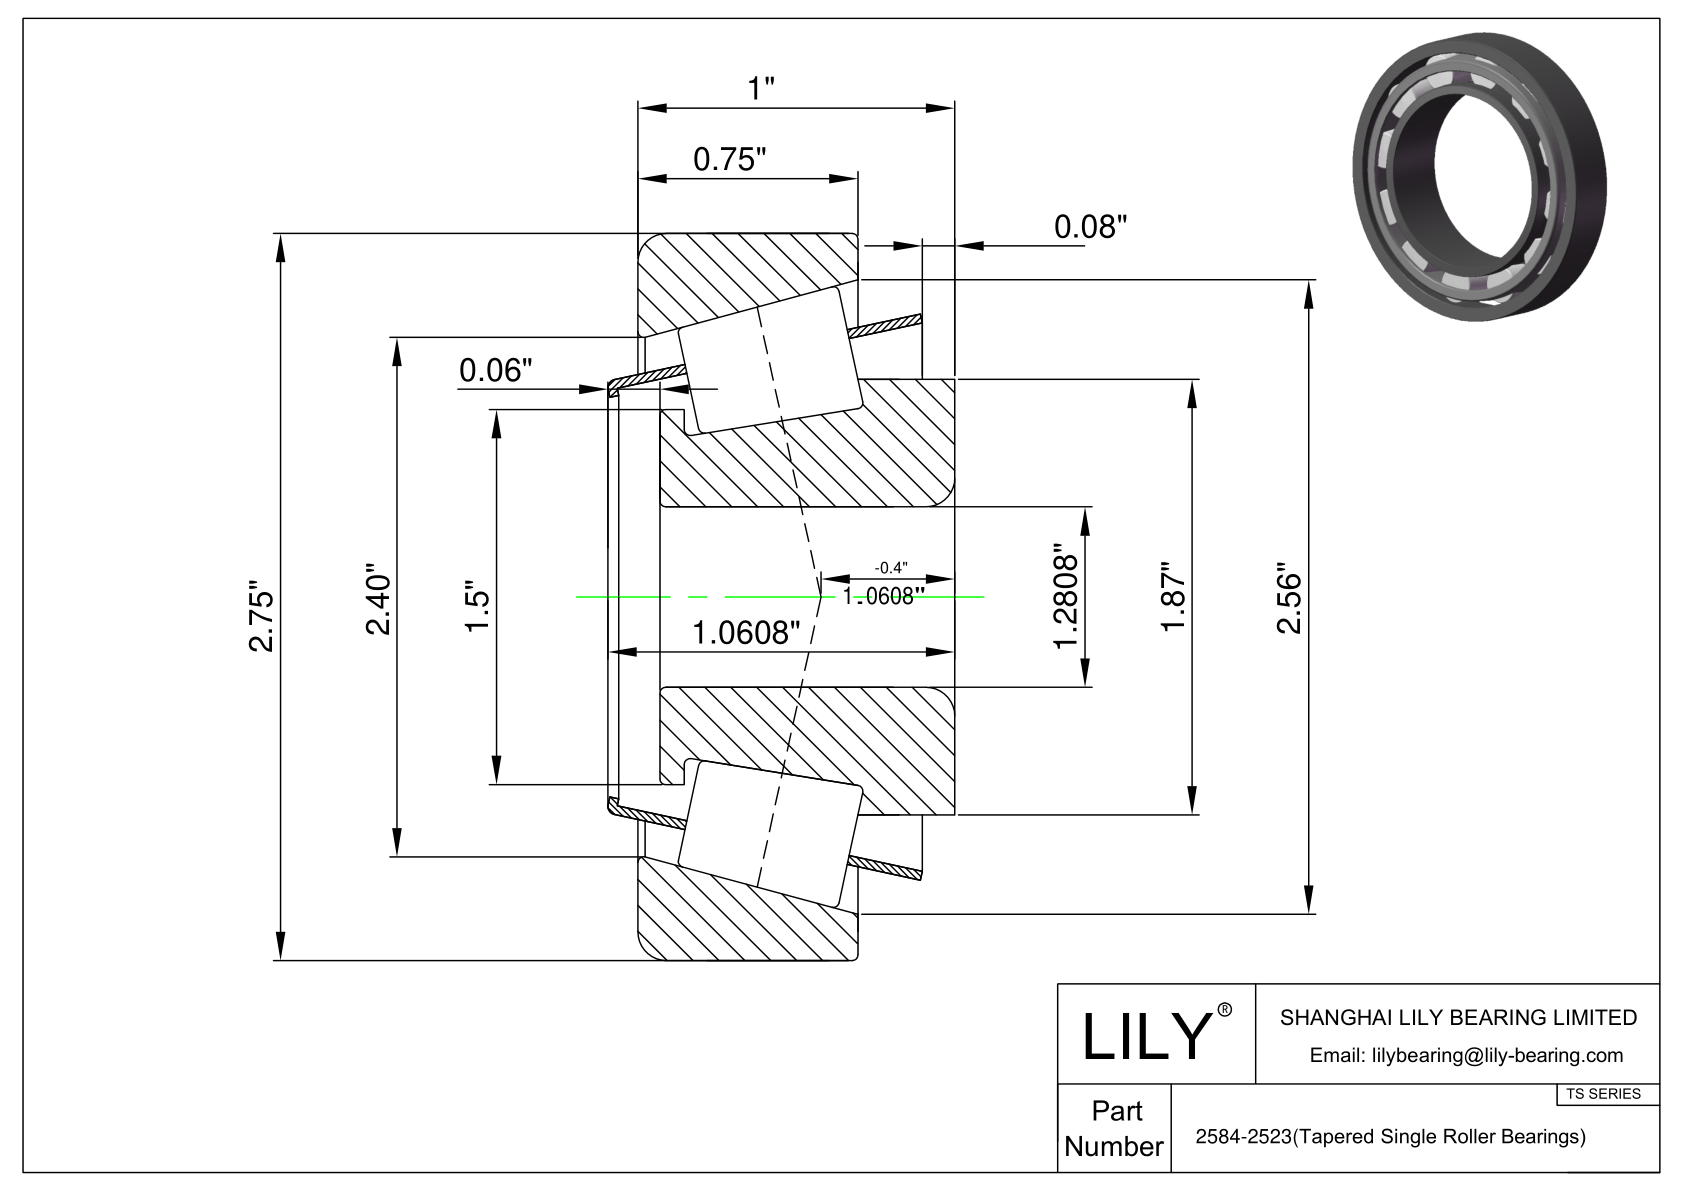 2584-2523 TS (Tapered Single Roller Bearings) (Imperial) cad drawing